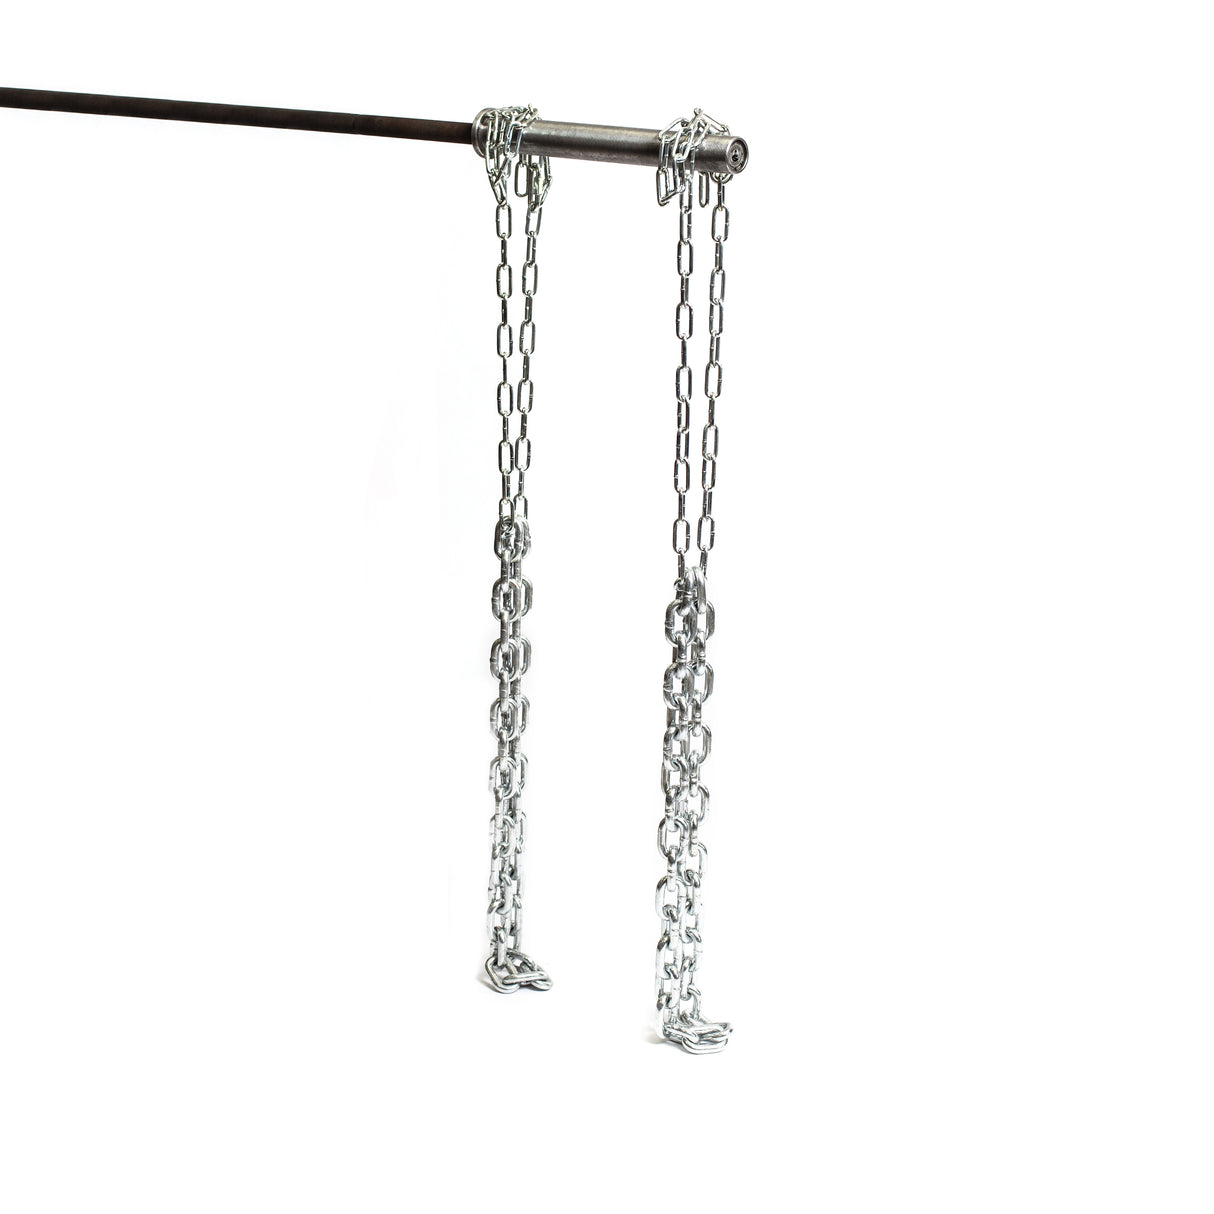 Weightlifting Chains - 28 LB Set